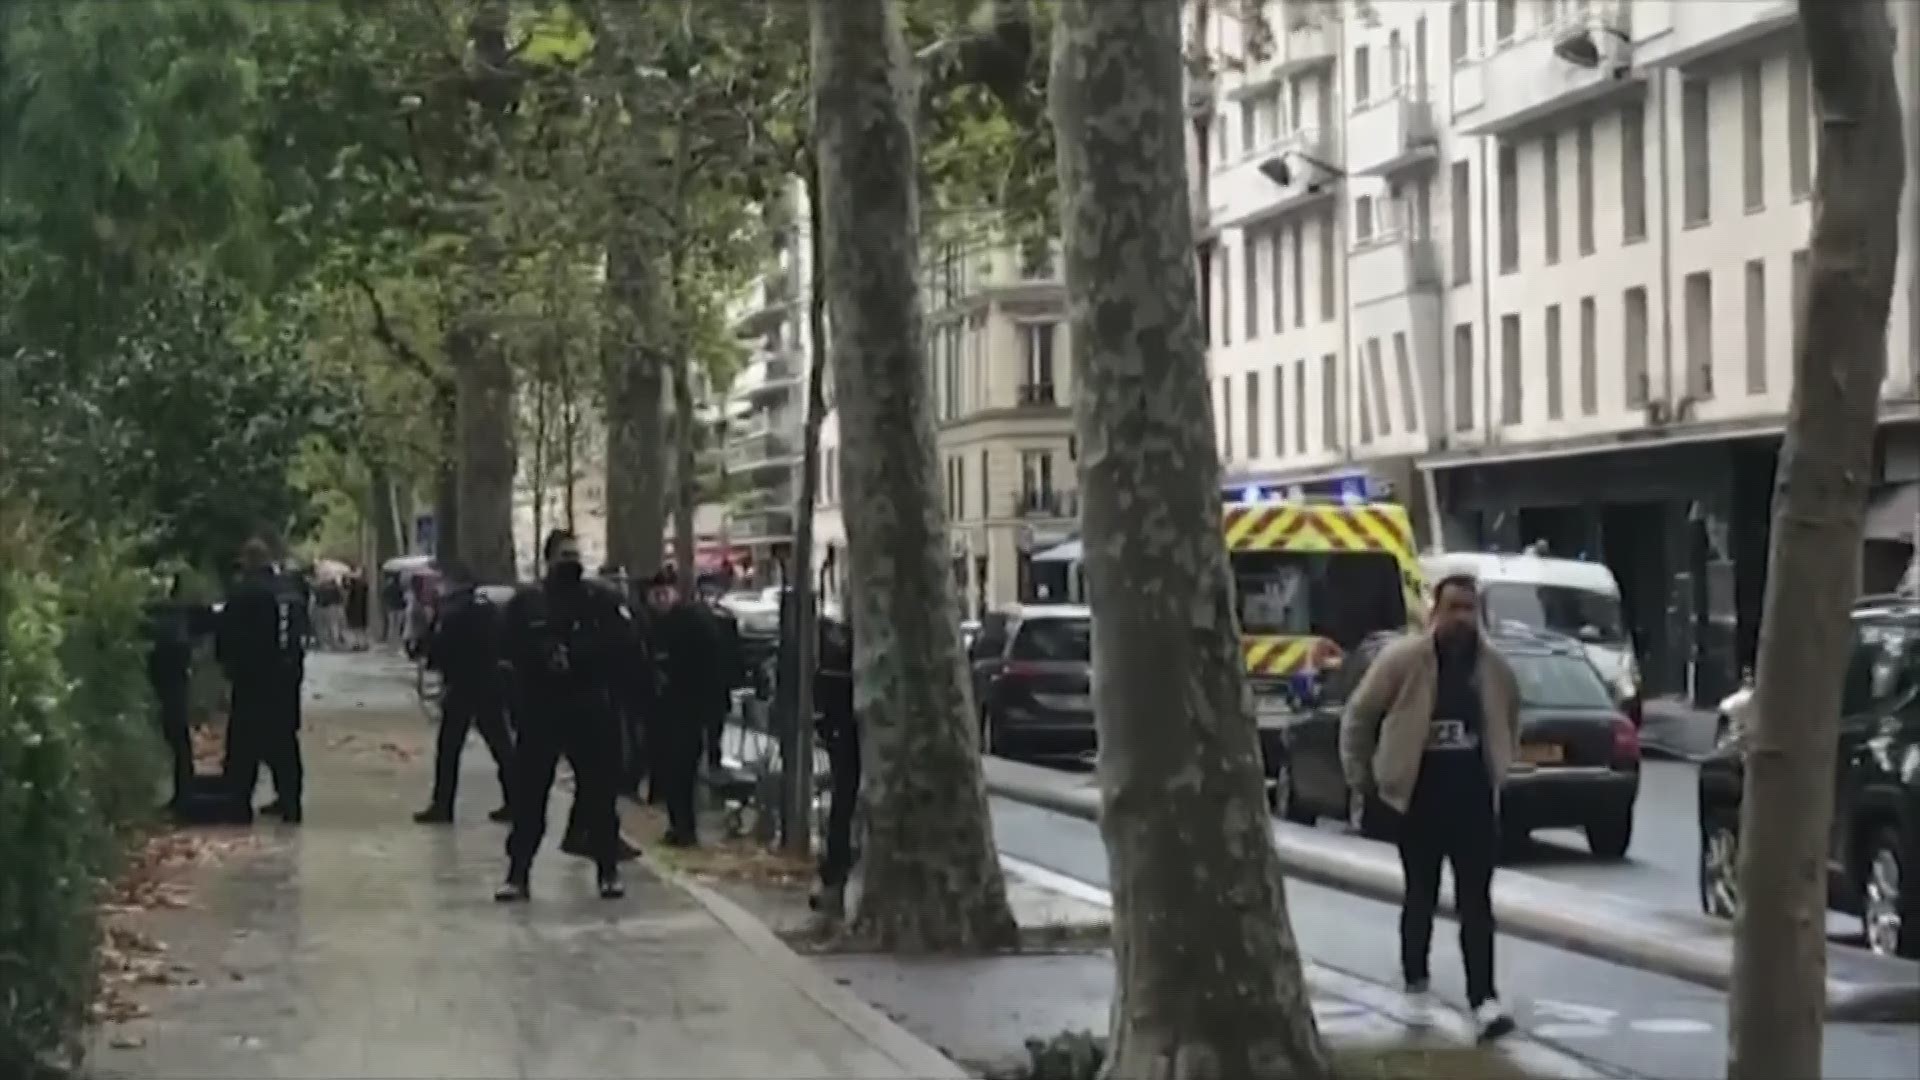 At least two people were wounded in a knife attack Sept. 25, 2020, near the former offices of the satirical newspaper Charlie Hebdo in Paris, police said.